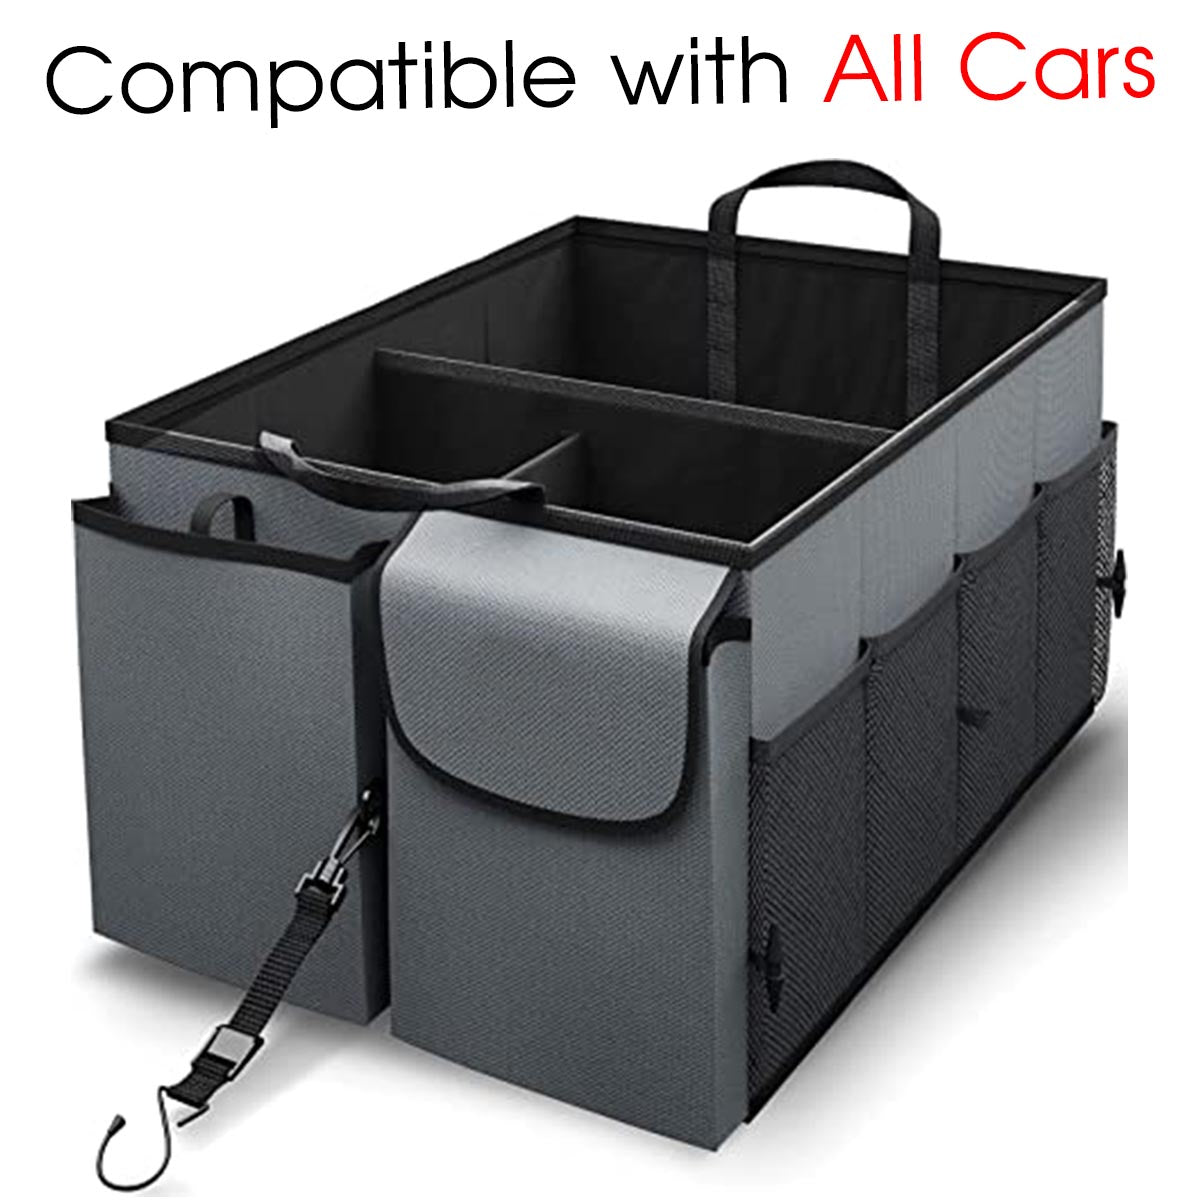 Car Trunk Organizer - Collapsible, Custom fit for All Cars, Multi-Compartment Automotive SUV Car Organizer for Storage w/ Adjustable Straps - Car Accessories for Women and Men LR12993